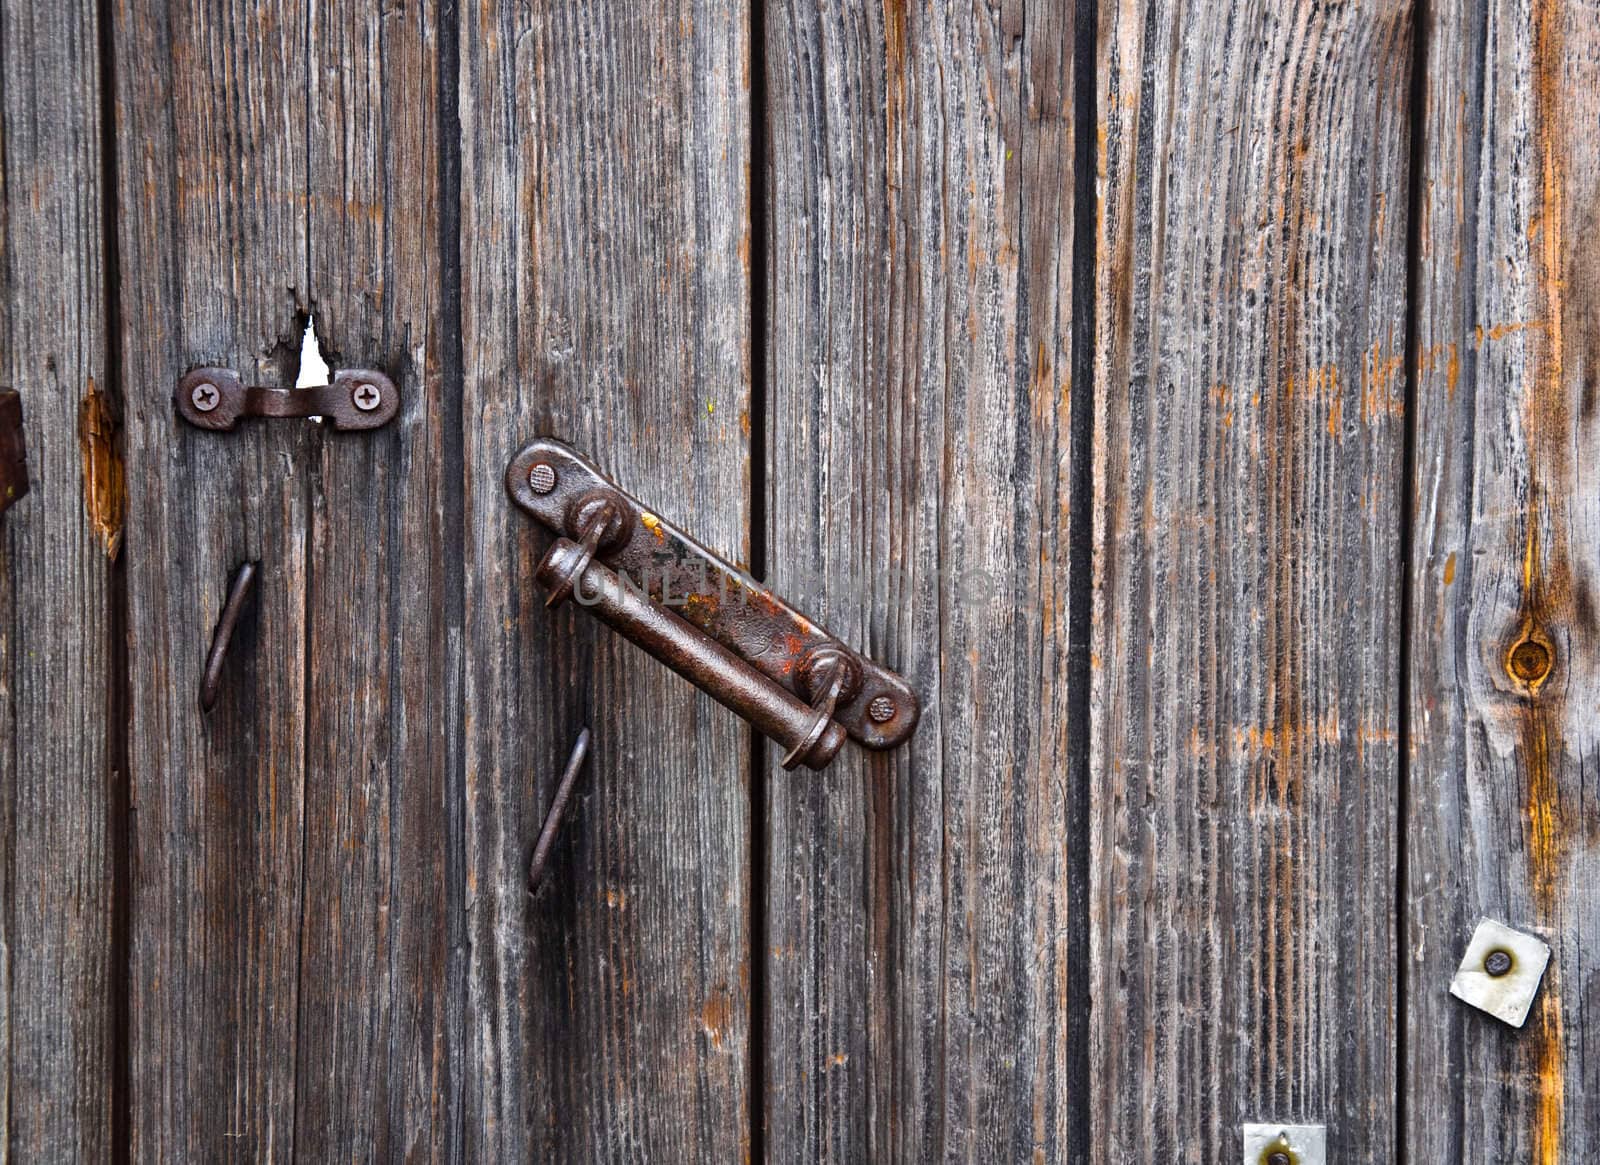 Old rusty door handle close. A fragment of a wooden door with a latch.